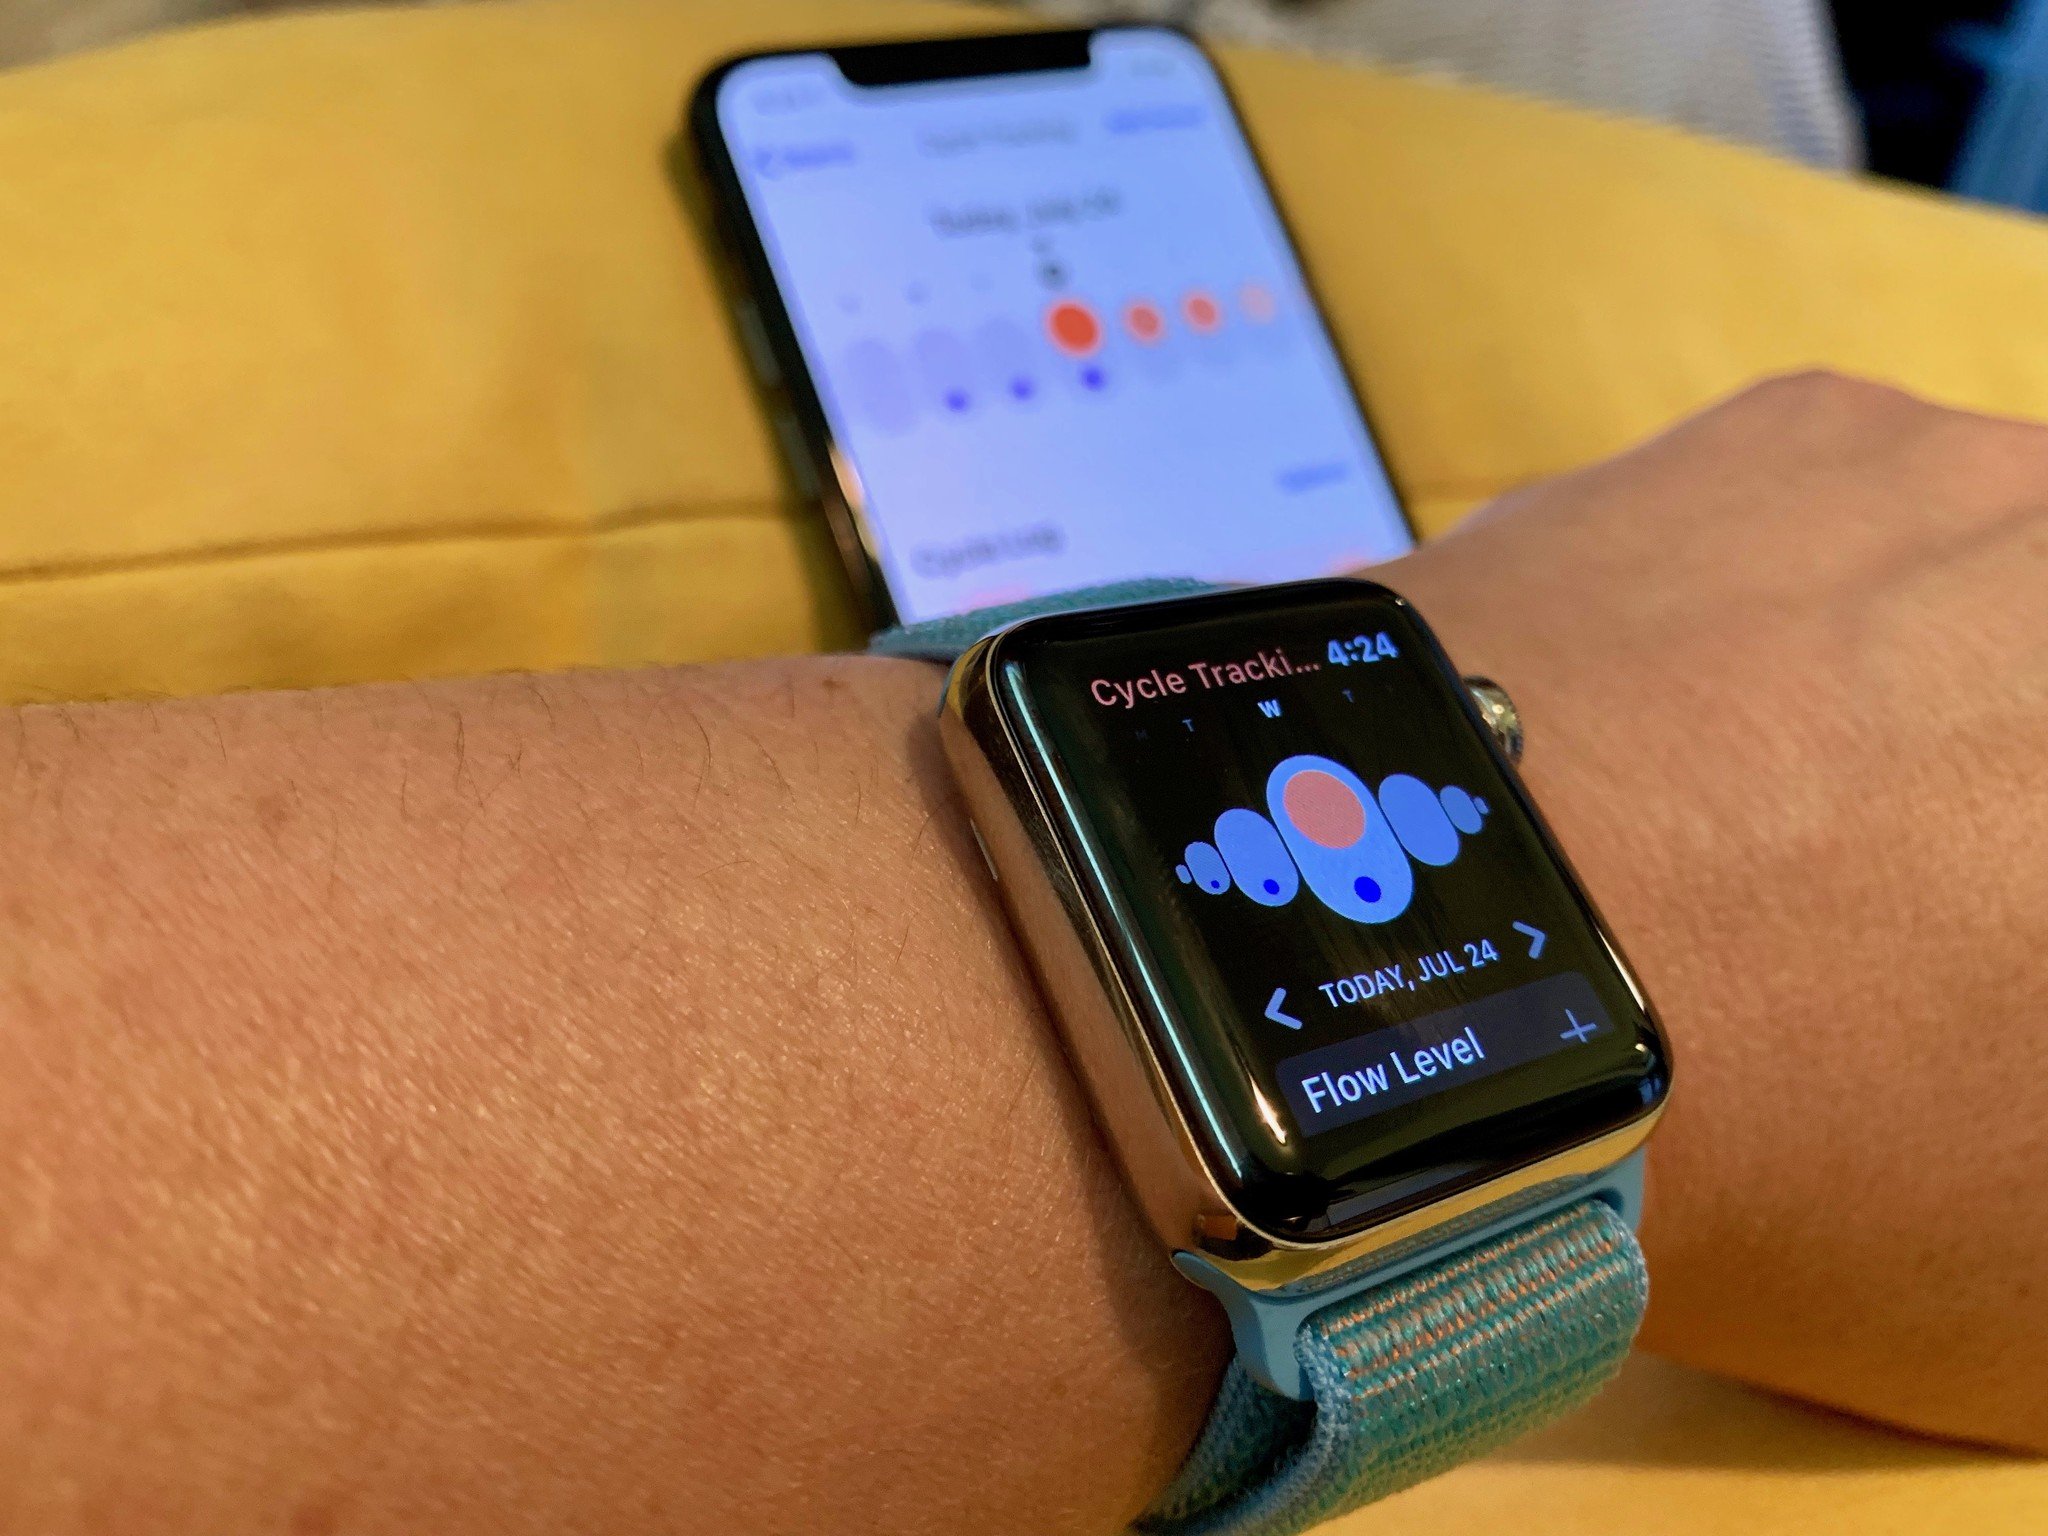 Cycle Tracking on iPhone and Apple Watch